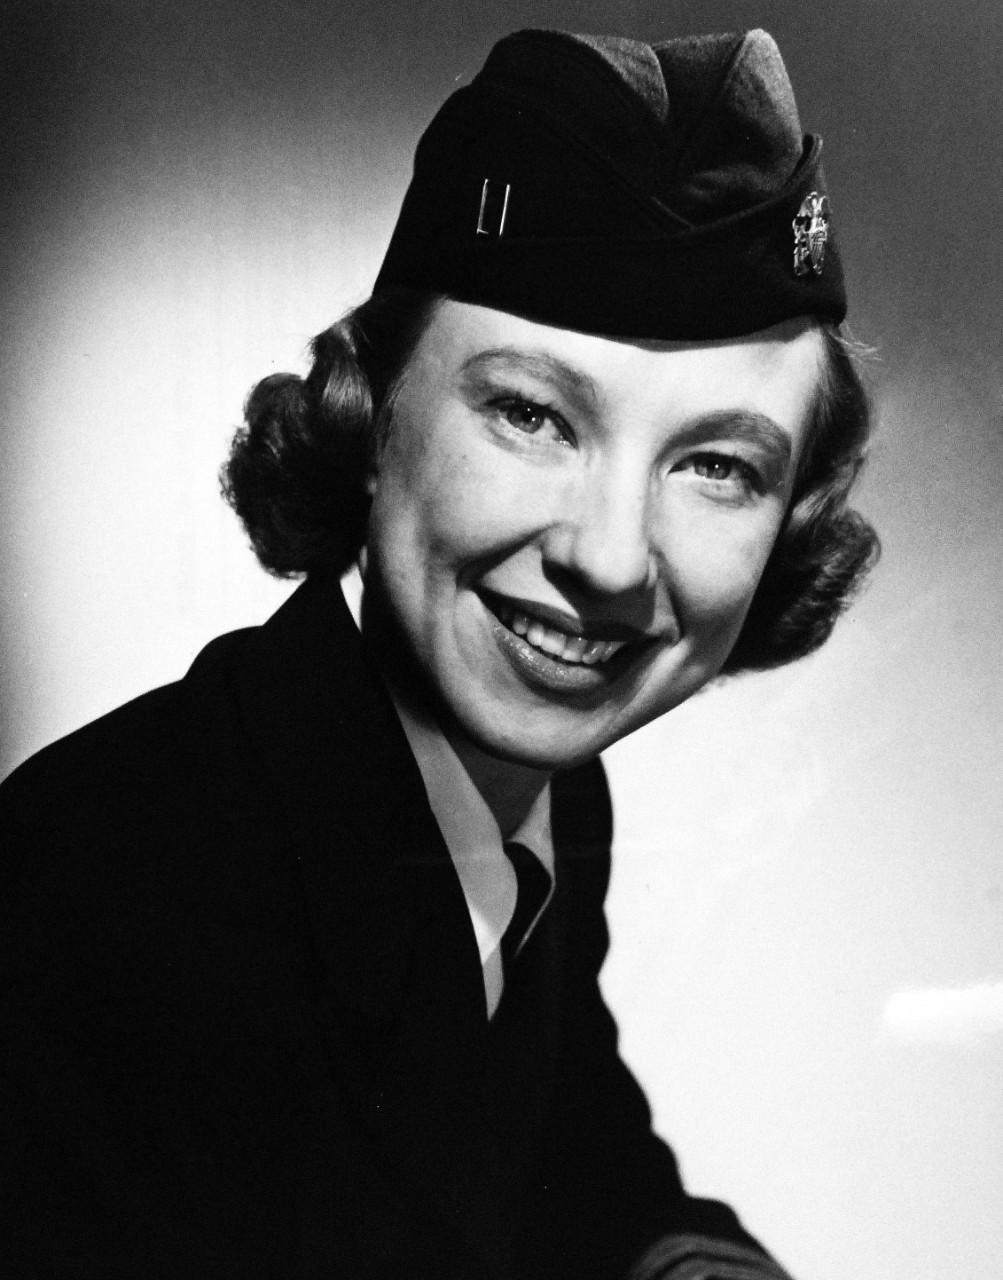 USN 708330:  U.S. Navy WAVE Lieutenant Ordered to Duty in U.S. Embassy, Oslo, Norway.   Lieutenant Francina Stonesifer reported in May 1952 for duty in the Office of the Naval Attaché, U.S. Embassy, Oslo, Norway.  She was the first woman in the U.S. Navy to be selected for an attaché assignment. Photograph released April 18, 1952.  Official U.S. Navy photograph, now in the collections of the National Archives. 